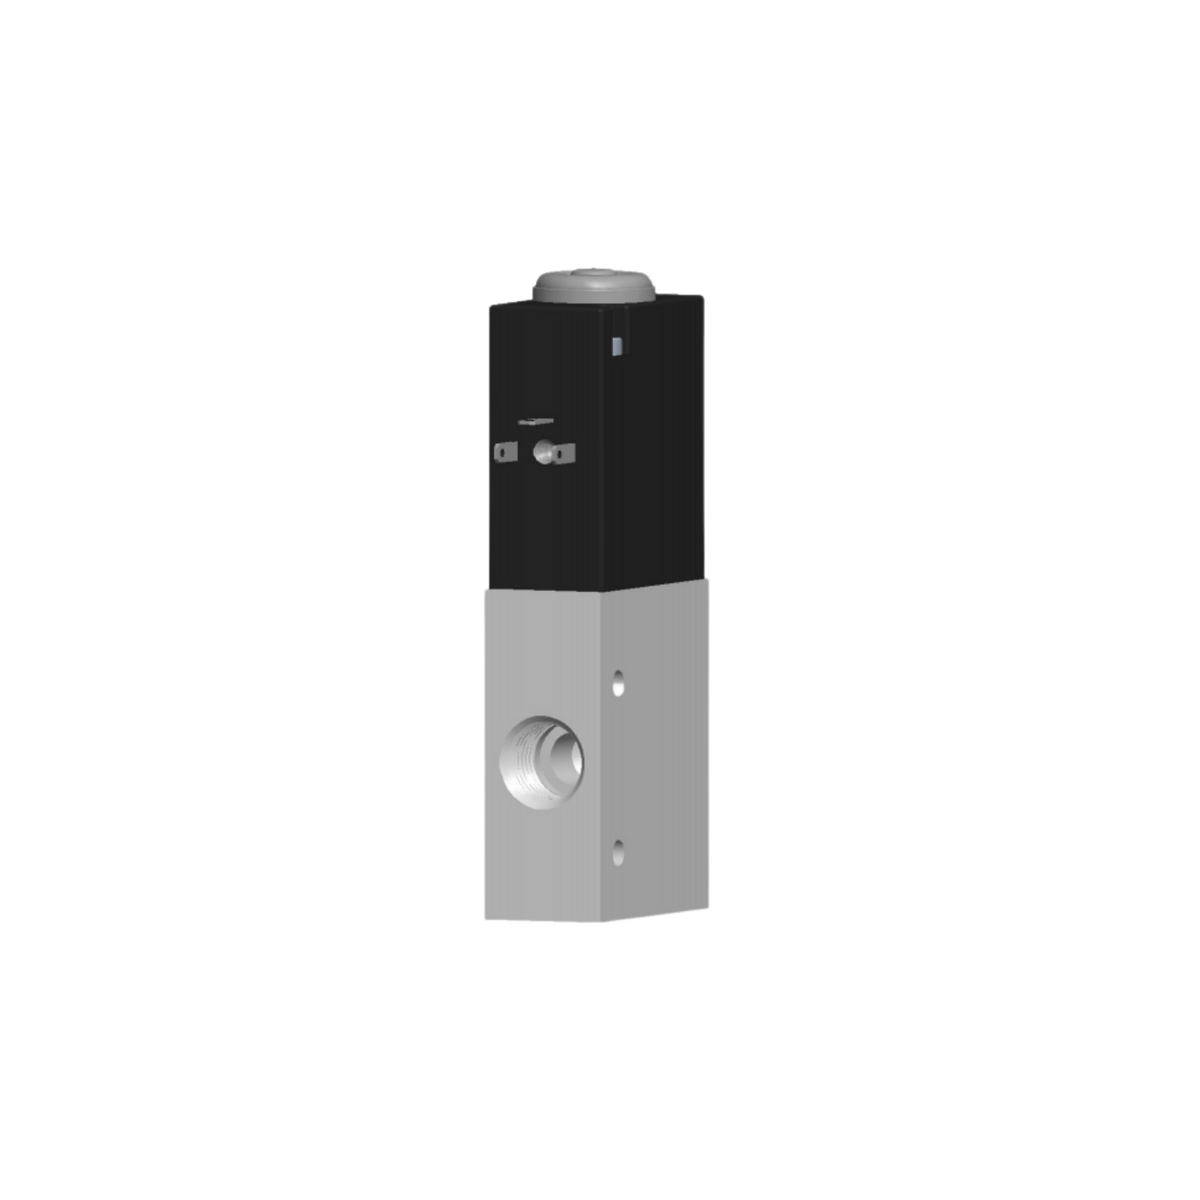 compact upright rectangular solenoid valve with an alumimum bottom with one port, and a black material on the top with an electrical plug